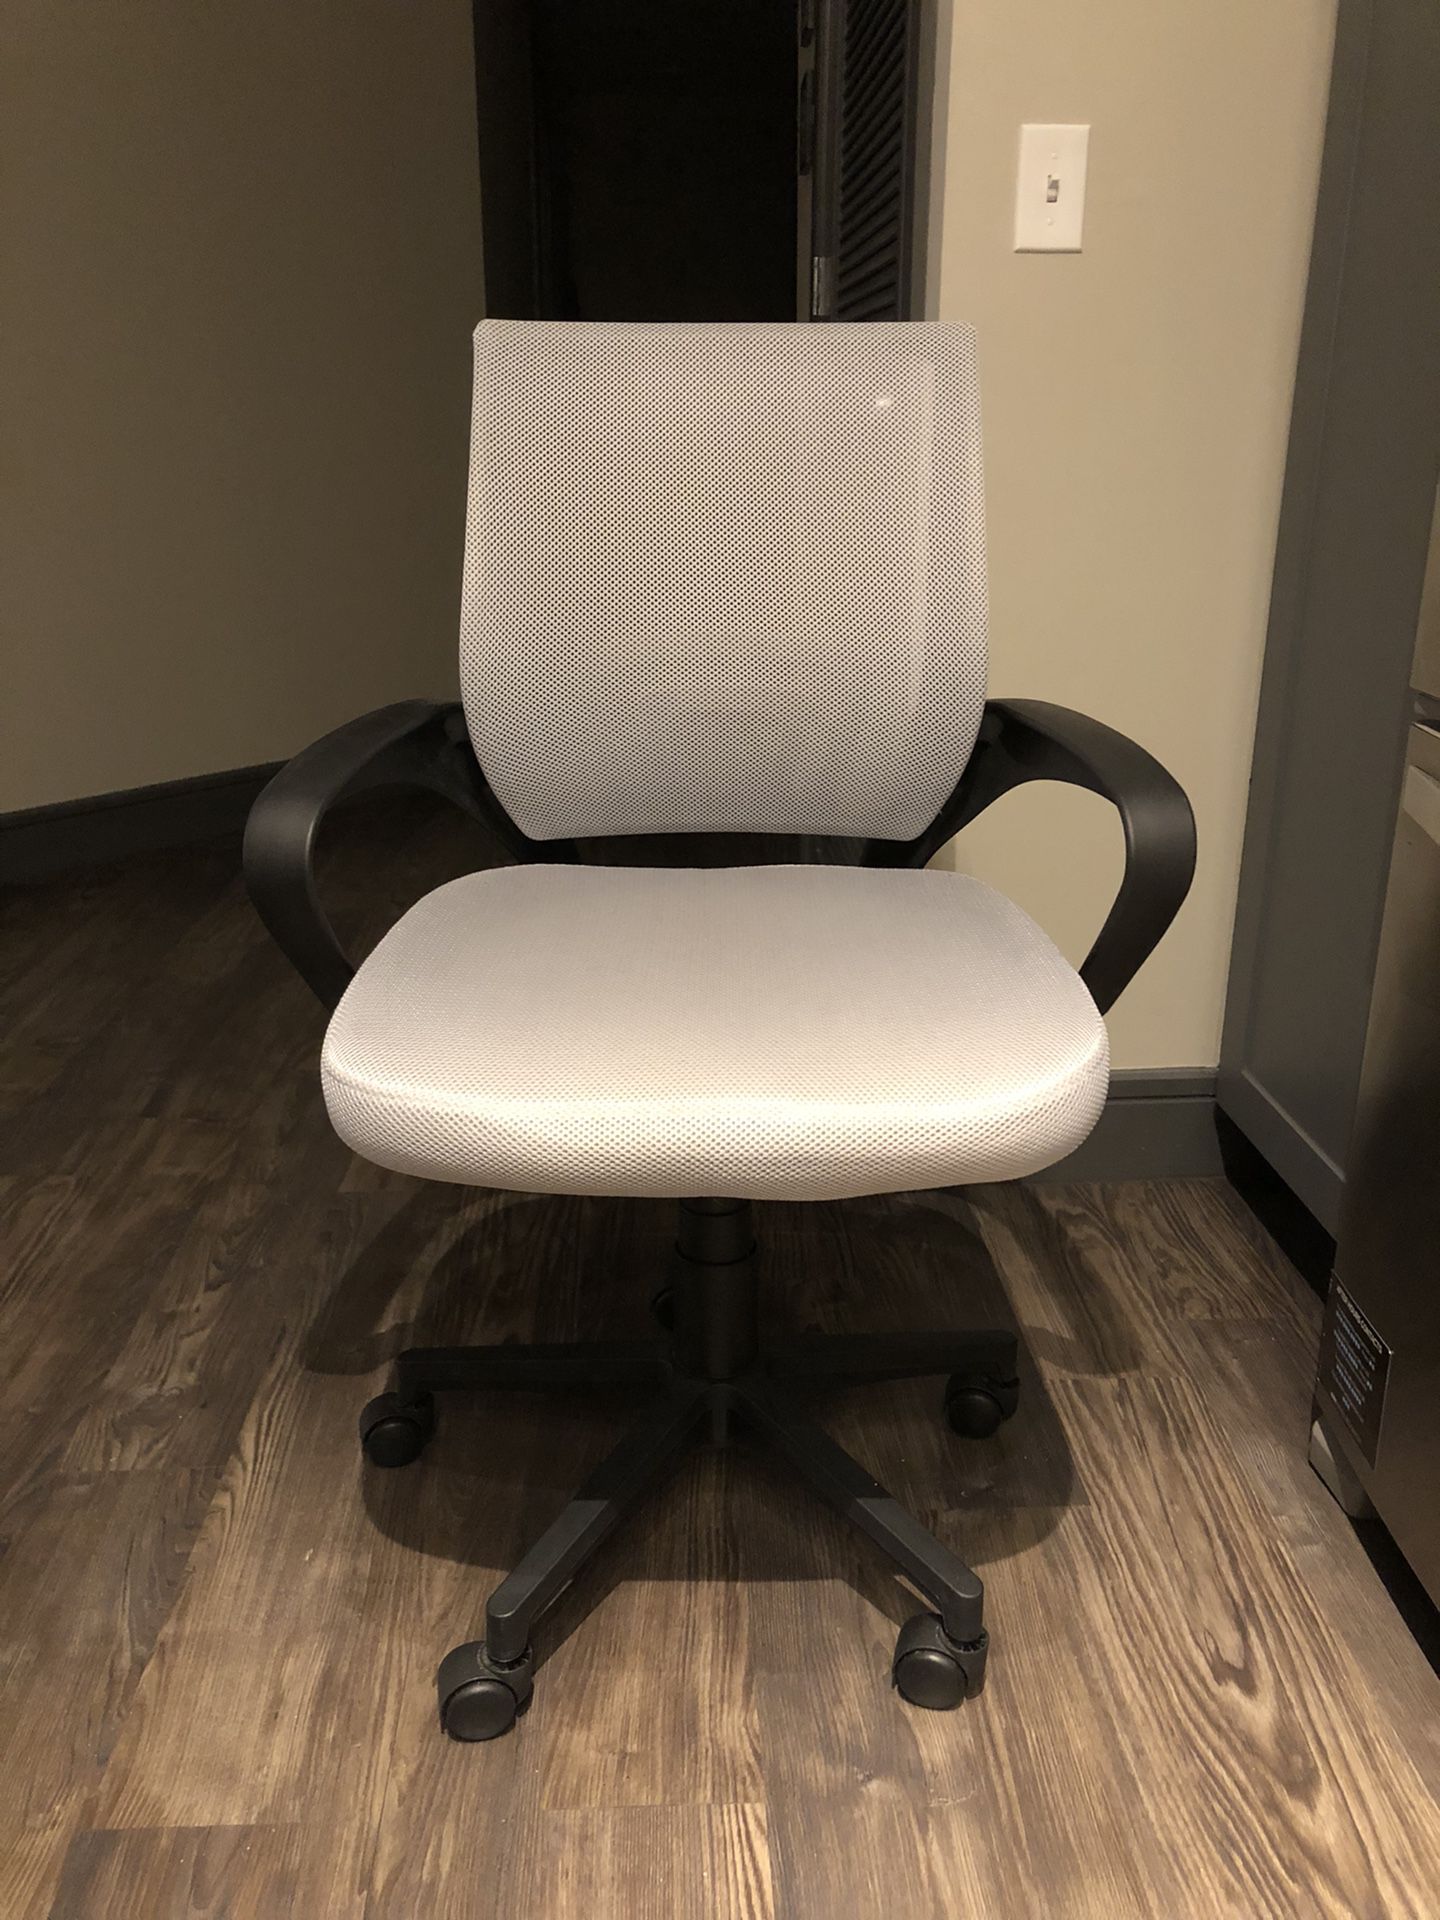 Barely Used Office Chair For Sale